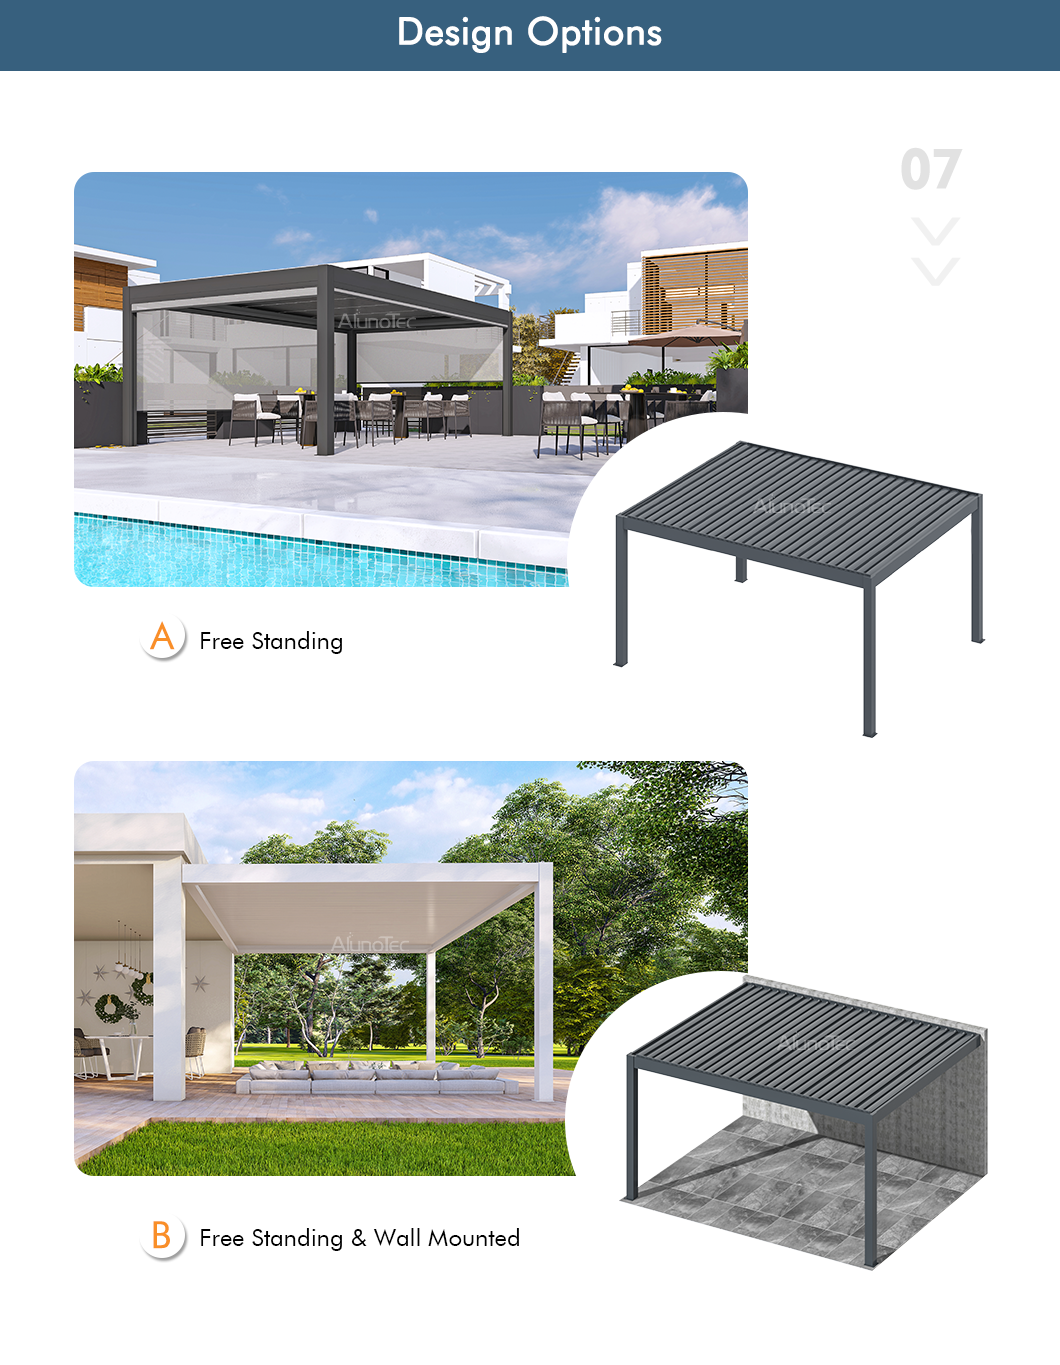 AlunoTec Deluxe Club Gazebo Meeting Room Retail Space Home Study Camping Gyms Pergola